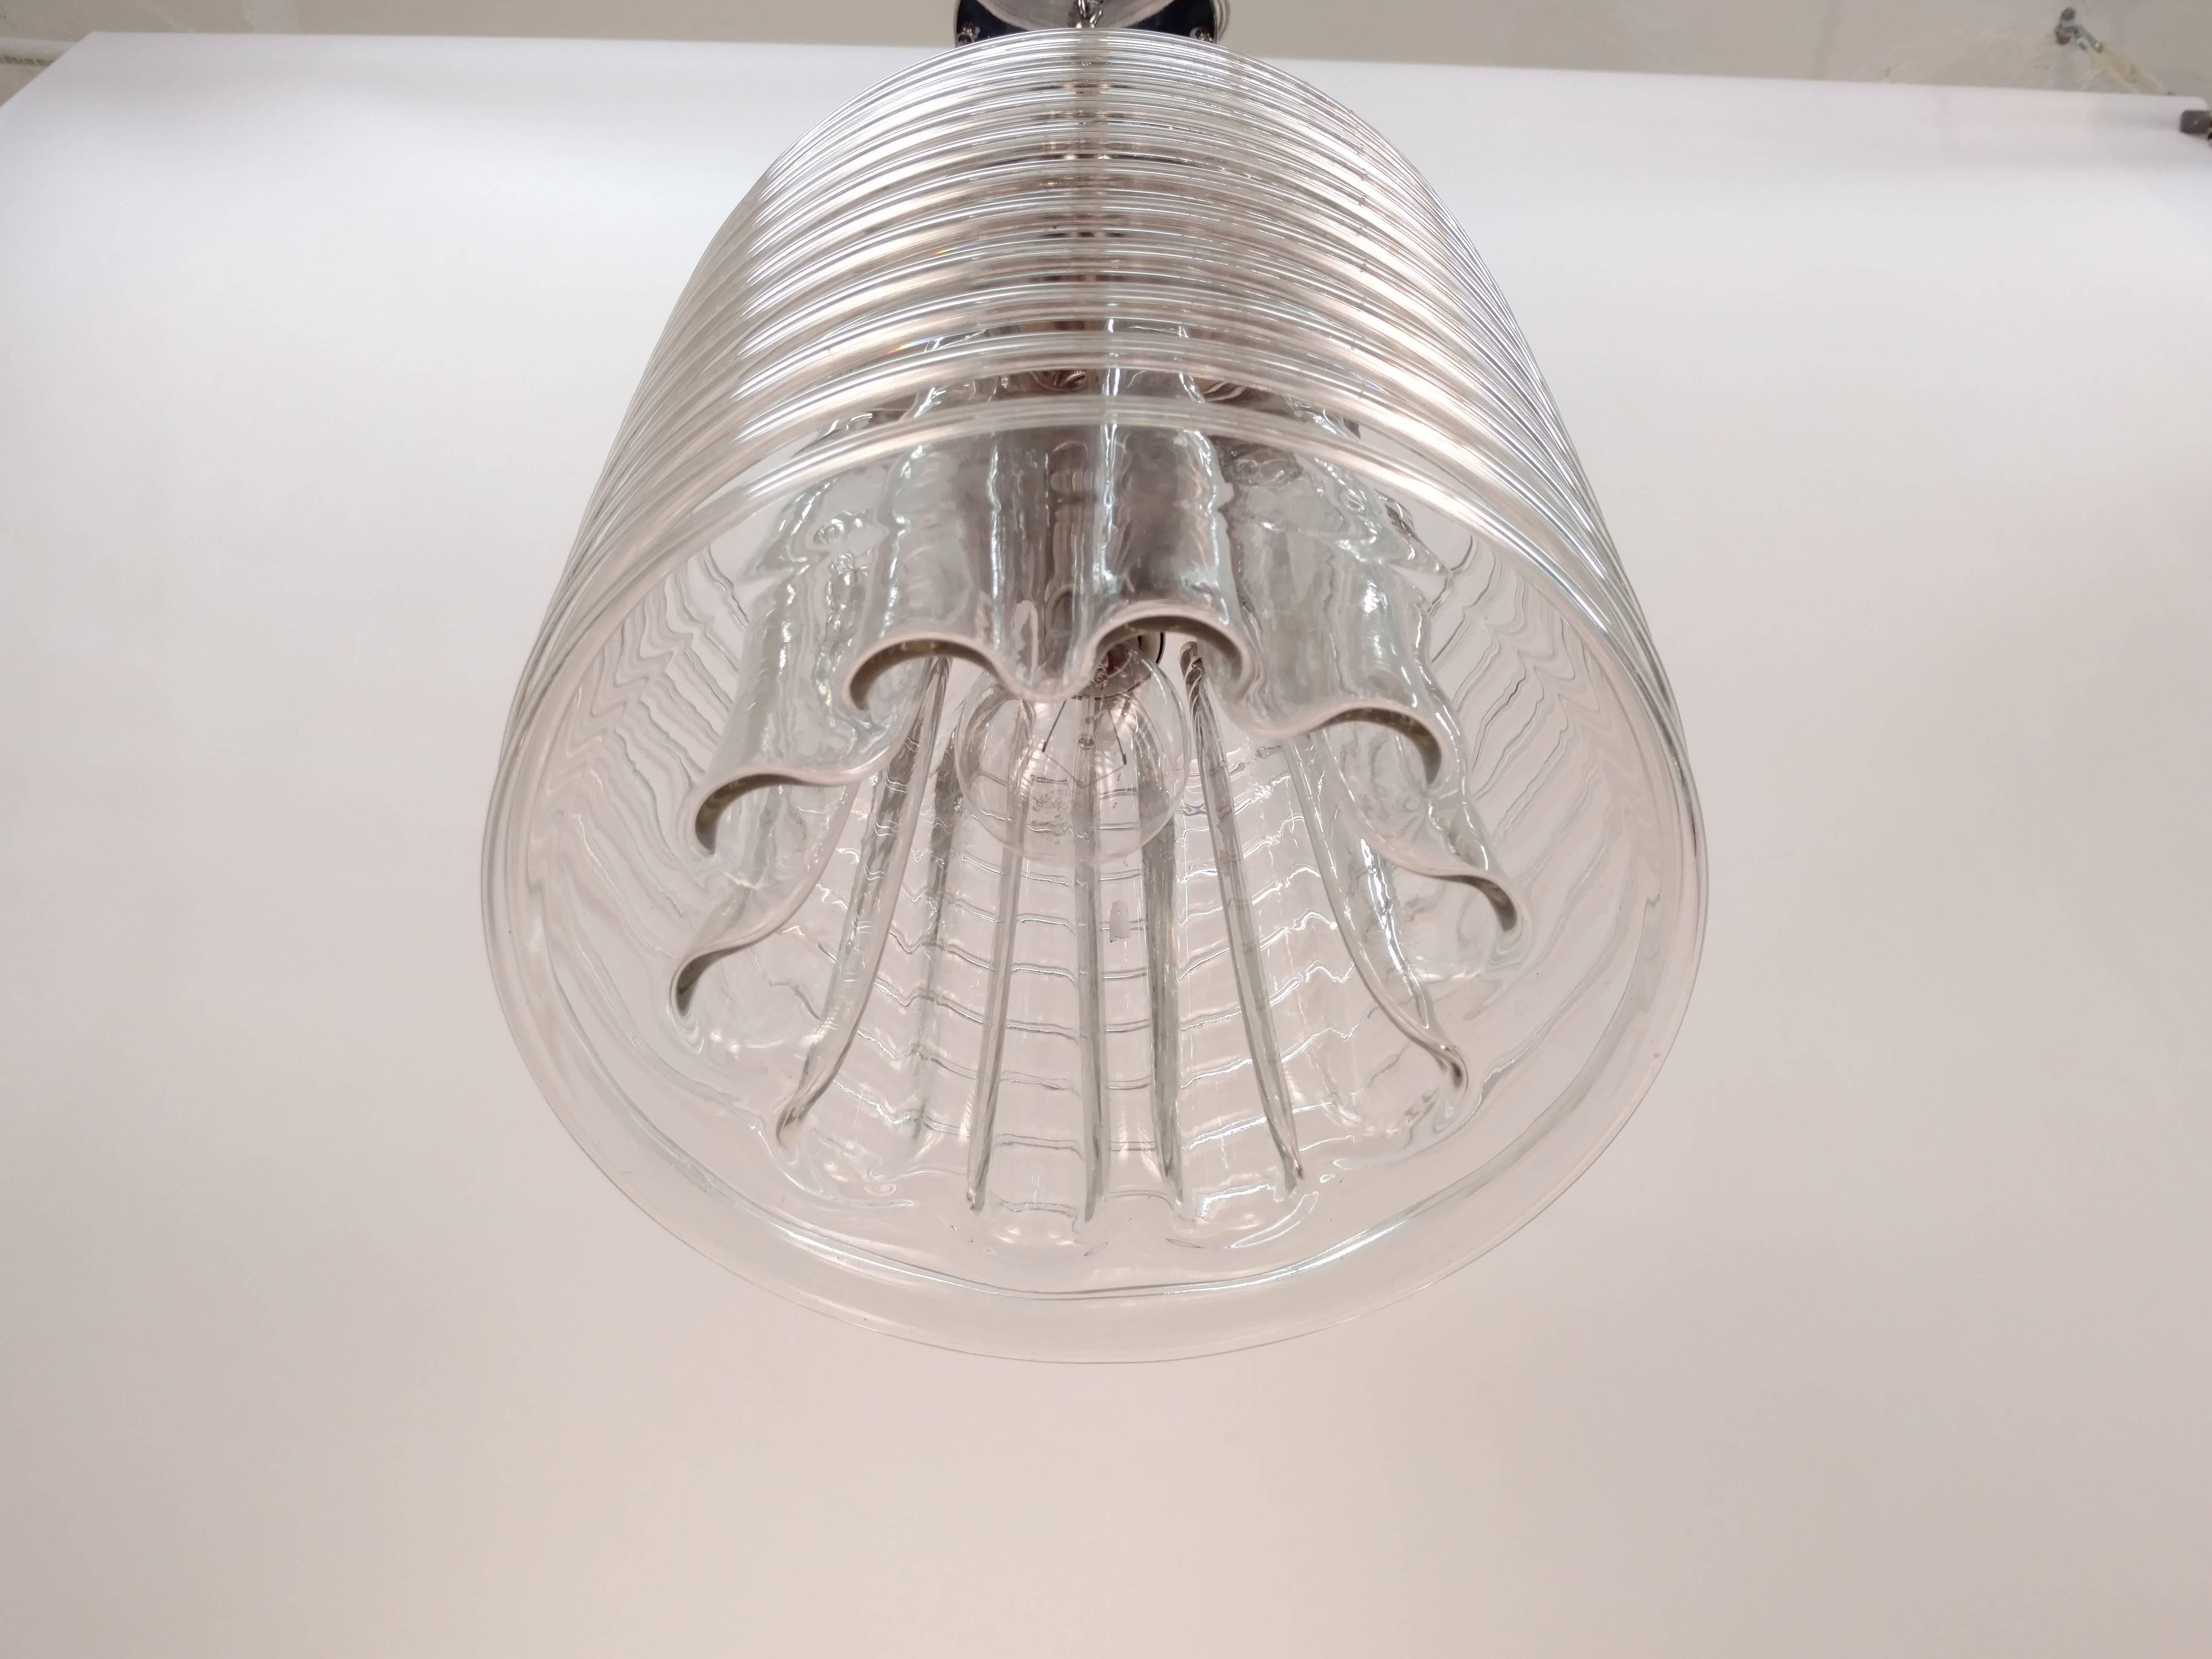 Exquisite glass shade.
Newly wired with medium base socket. Max 100 Watt
Measurements:
28in H to the canopy and 11in H only the glass part
11in D.